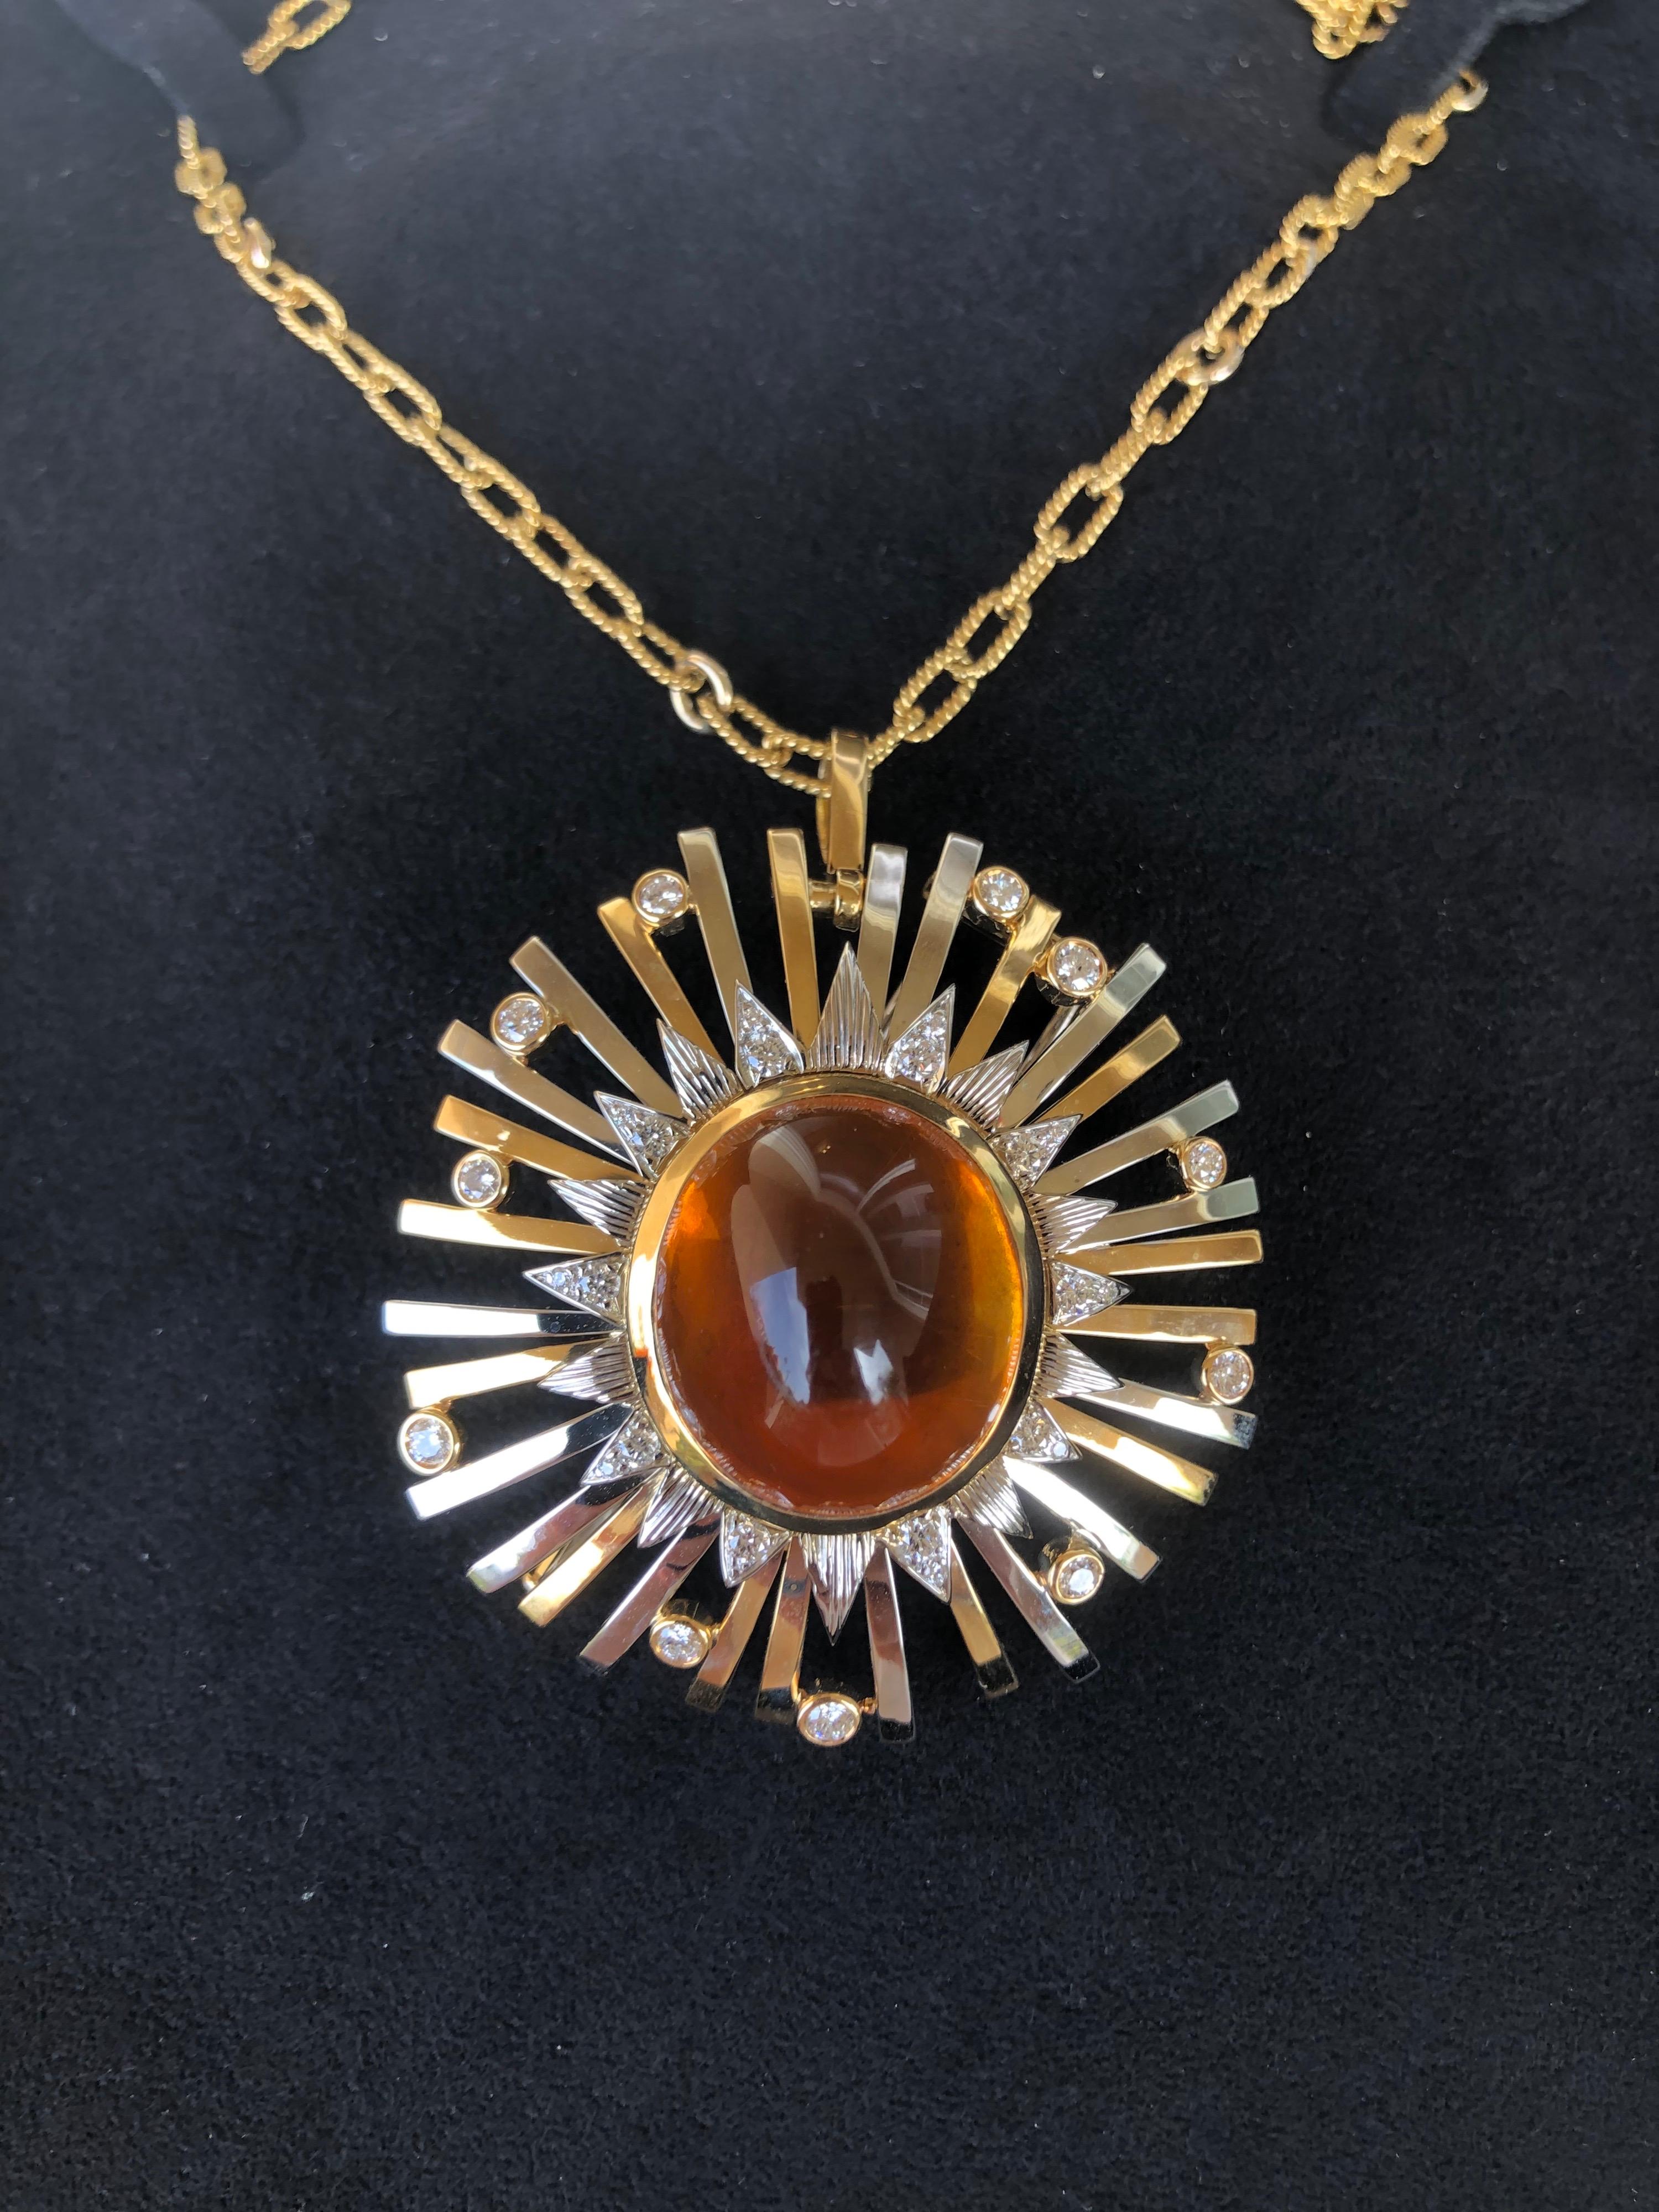 Madeira Citrine Pendant Necklace Brooch Cabochon 24.14 Carat  For Sale 12